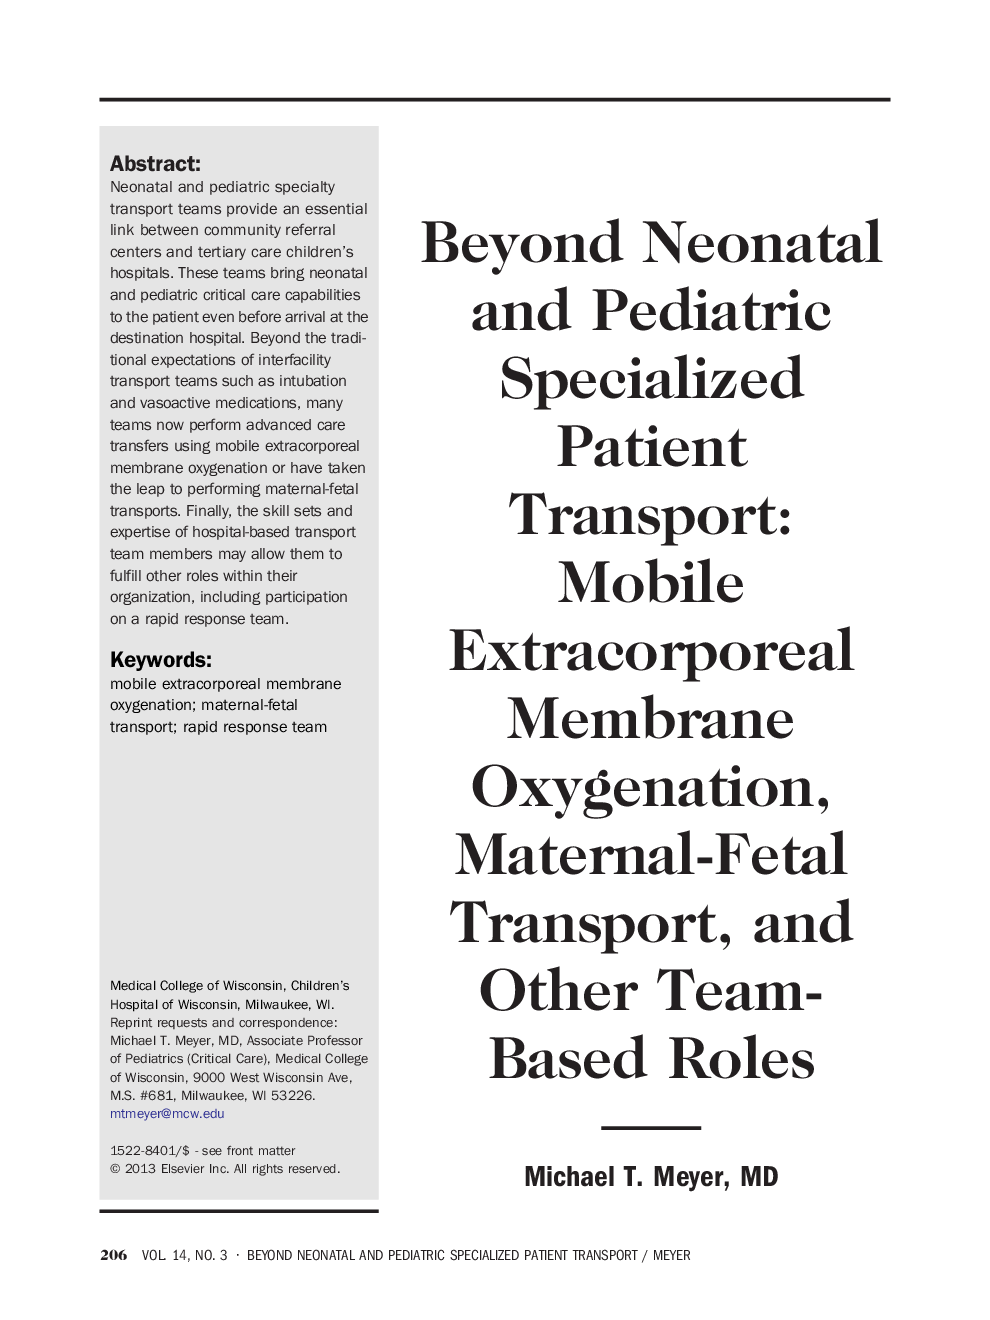 Beyond Neonatal and Pediatric Specialized Patient Transport: Mobile Extracorporeal Membrane Oxygenation, Maternal-Fetal Transport, and Other Team-Based Roles